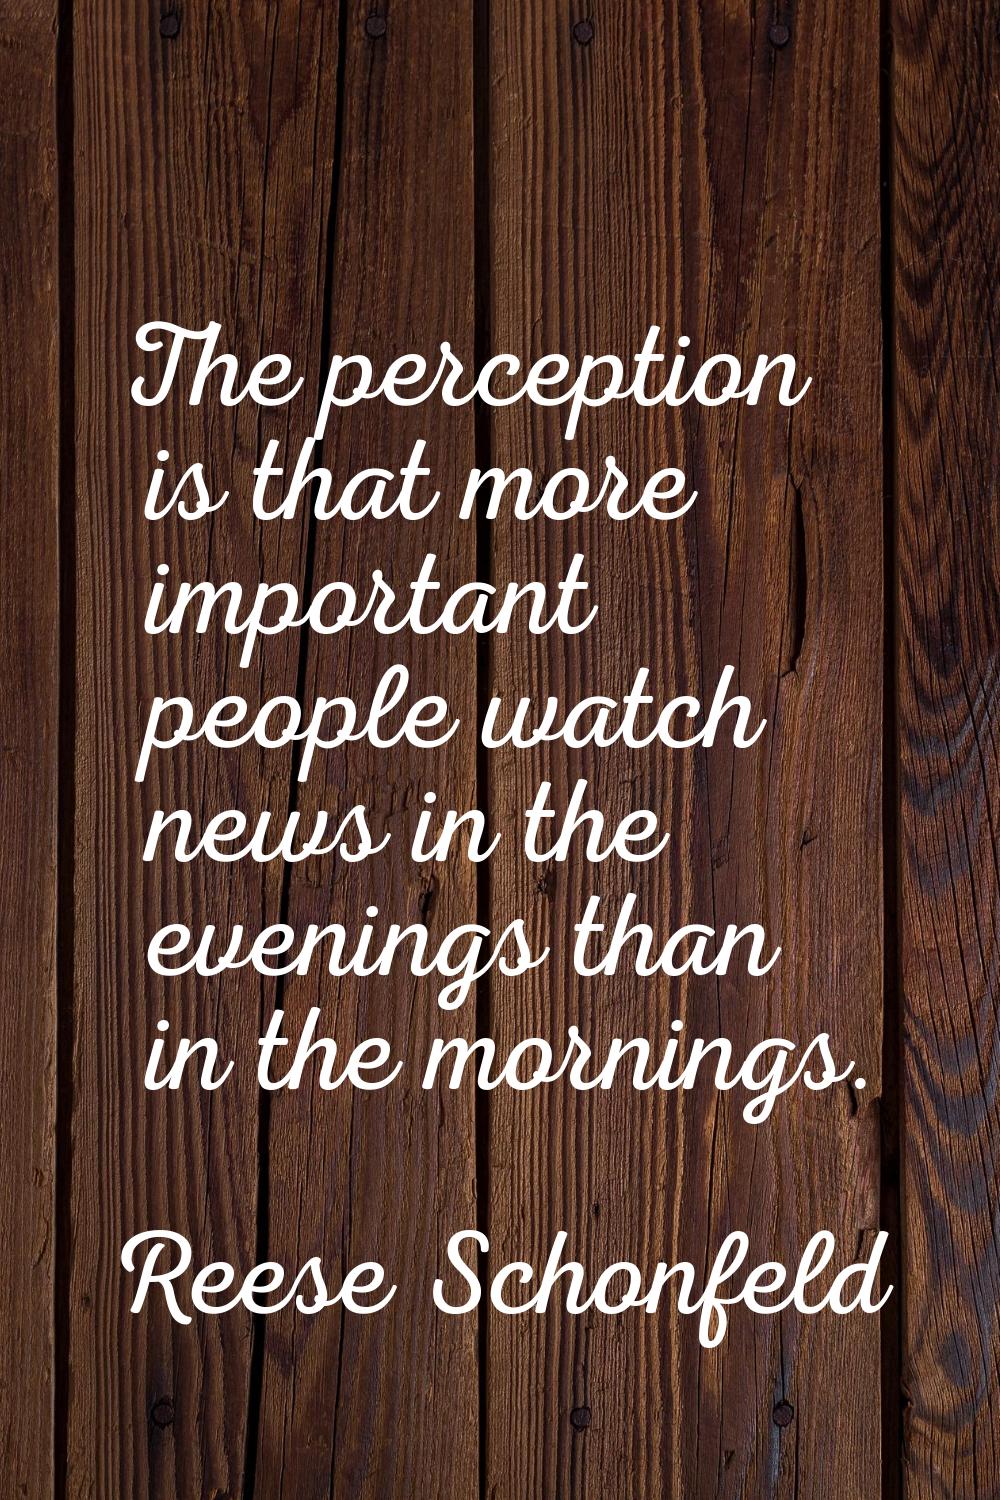 The perception is that more important people watch news in the evenings than in the mornings.